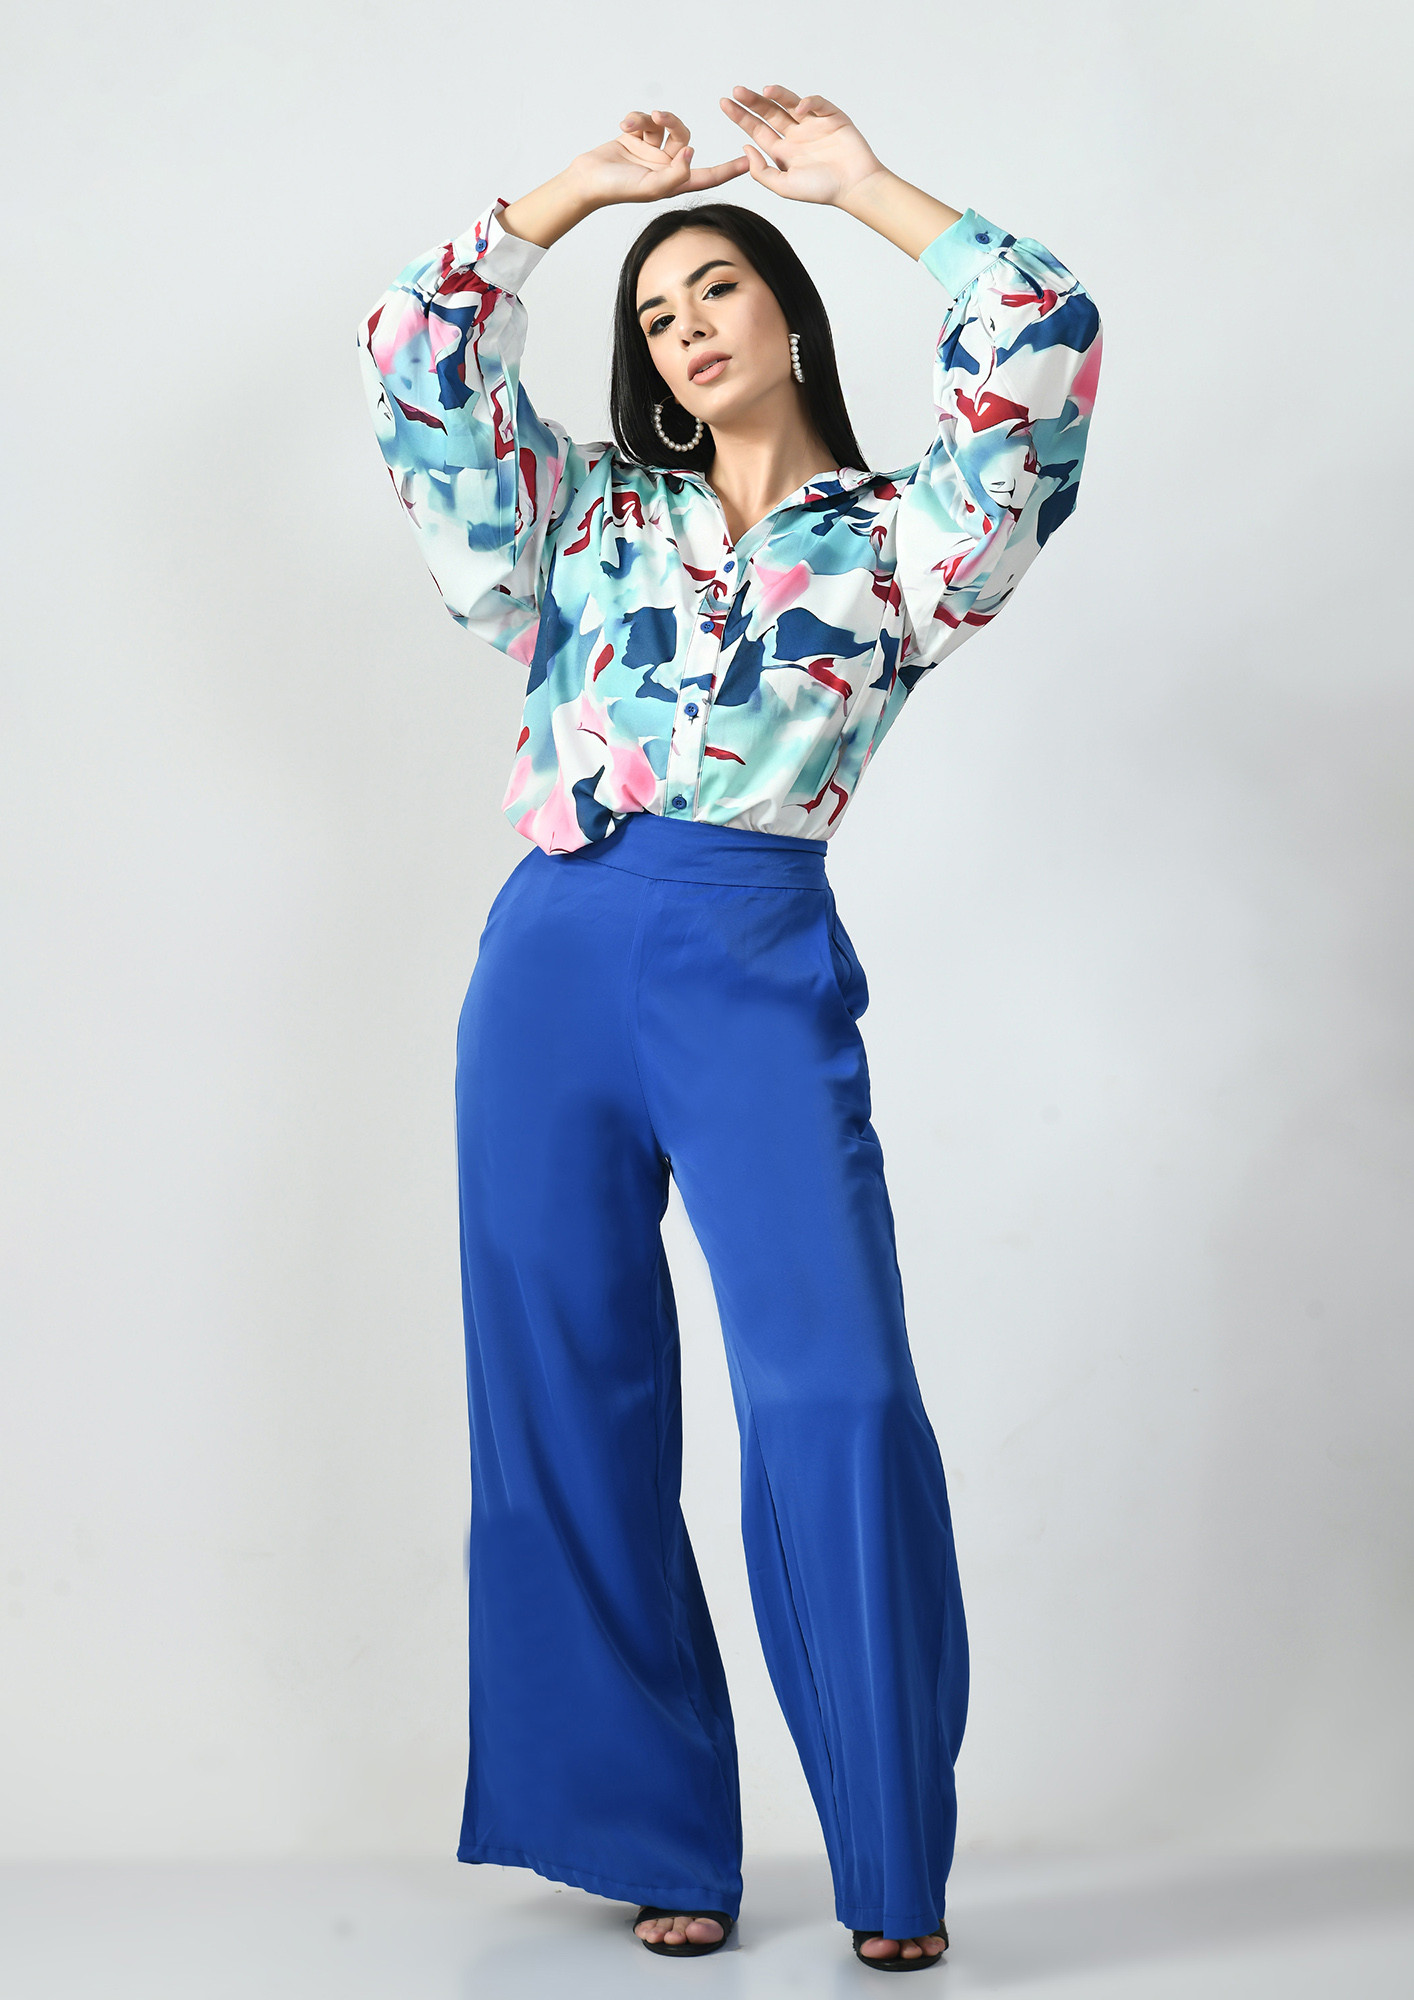 Party wear Bell Bottom Trousers with Shirts 5  StylesGlamourcom